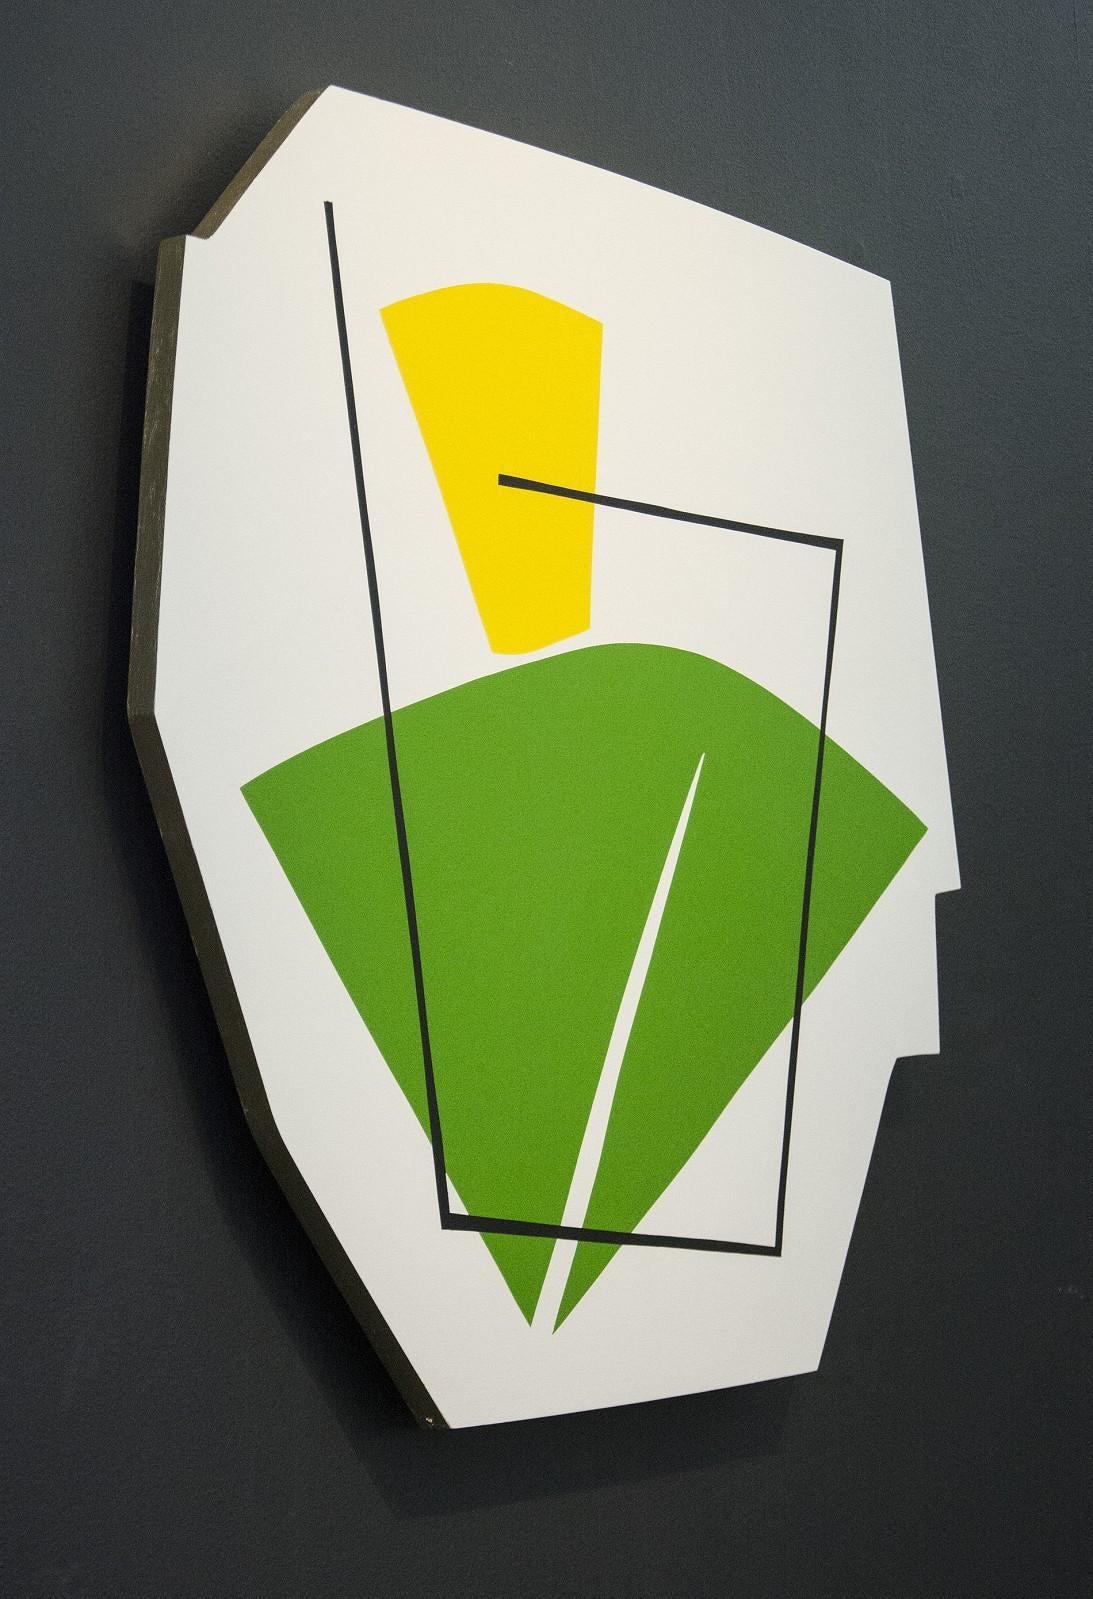 Green & Yellow Shape - fun, colourful, gold leaf edge, acrylic on shaped panel - Painting by Aron Hill